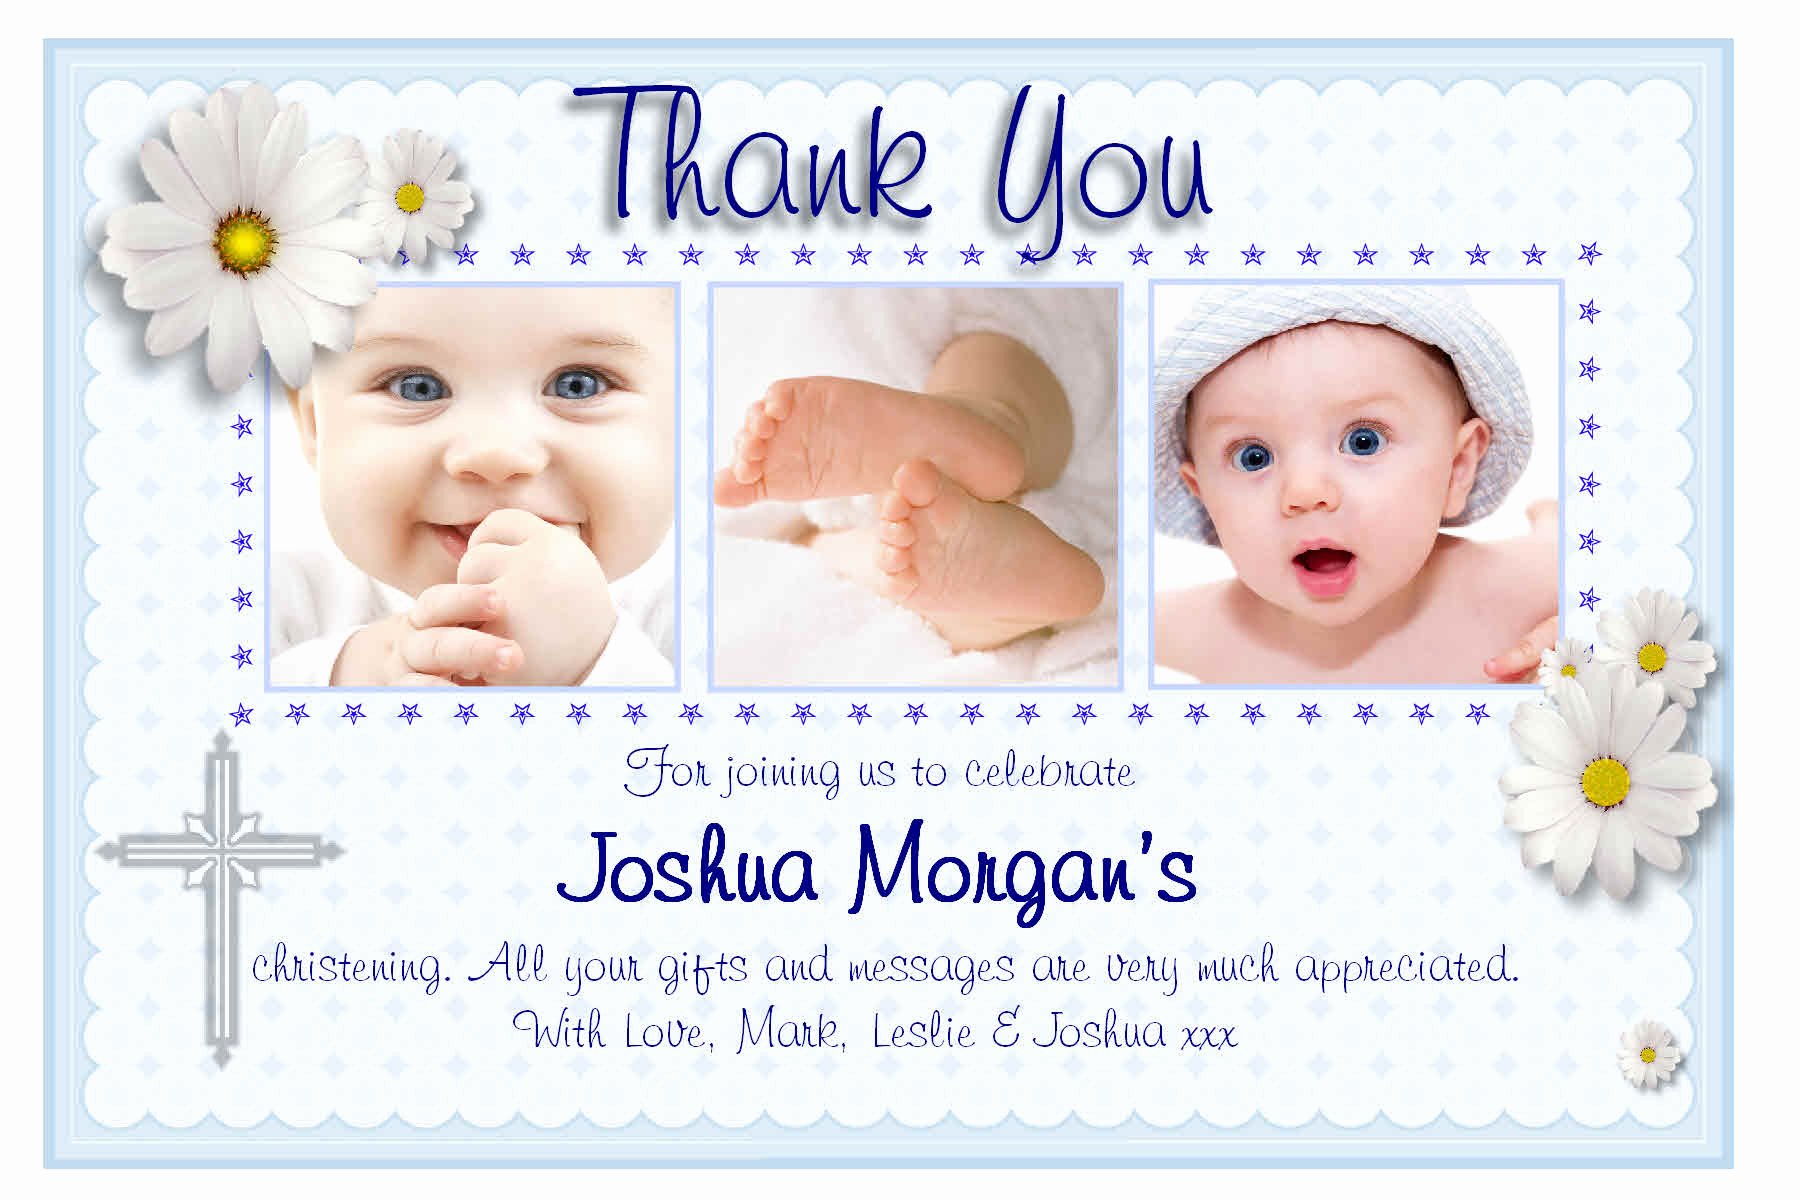 Thank You Cards for Baptism Best Of Personalised Christening Thank You Cards Personalised Baptism Thank You Cards